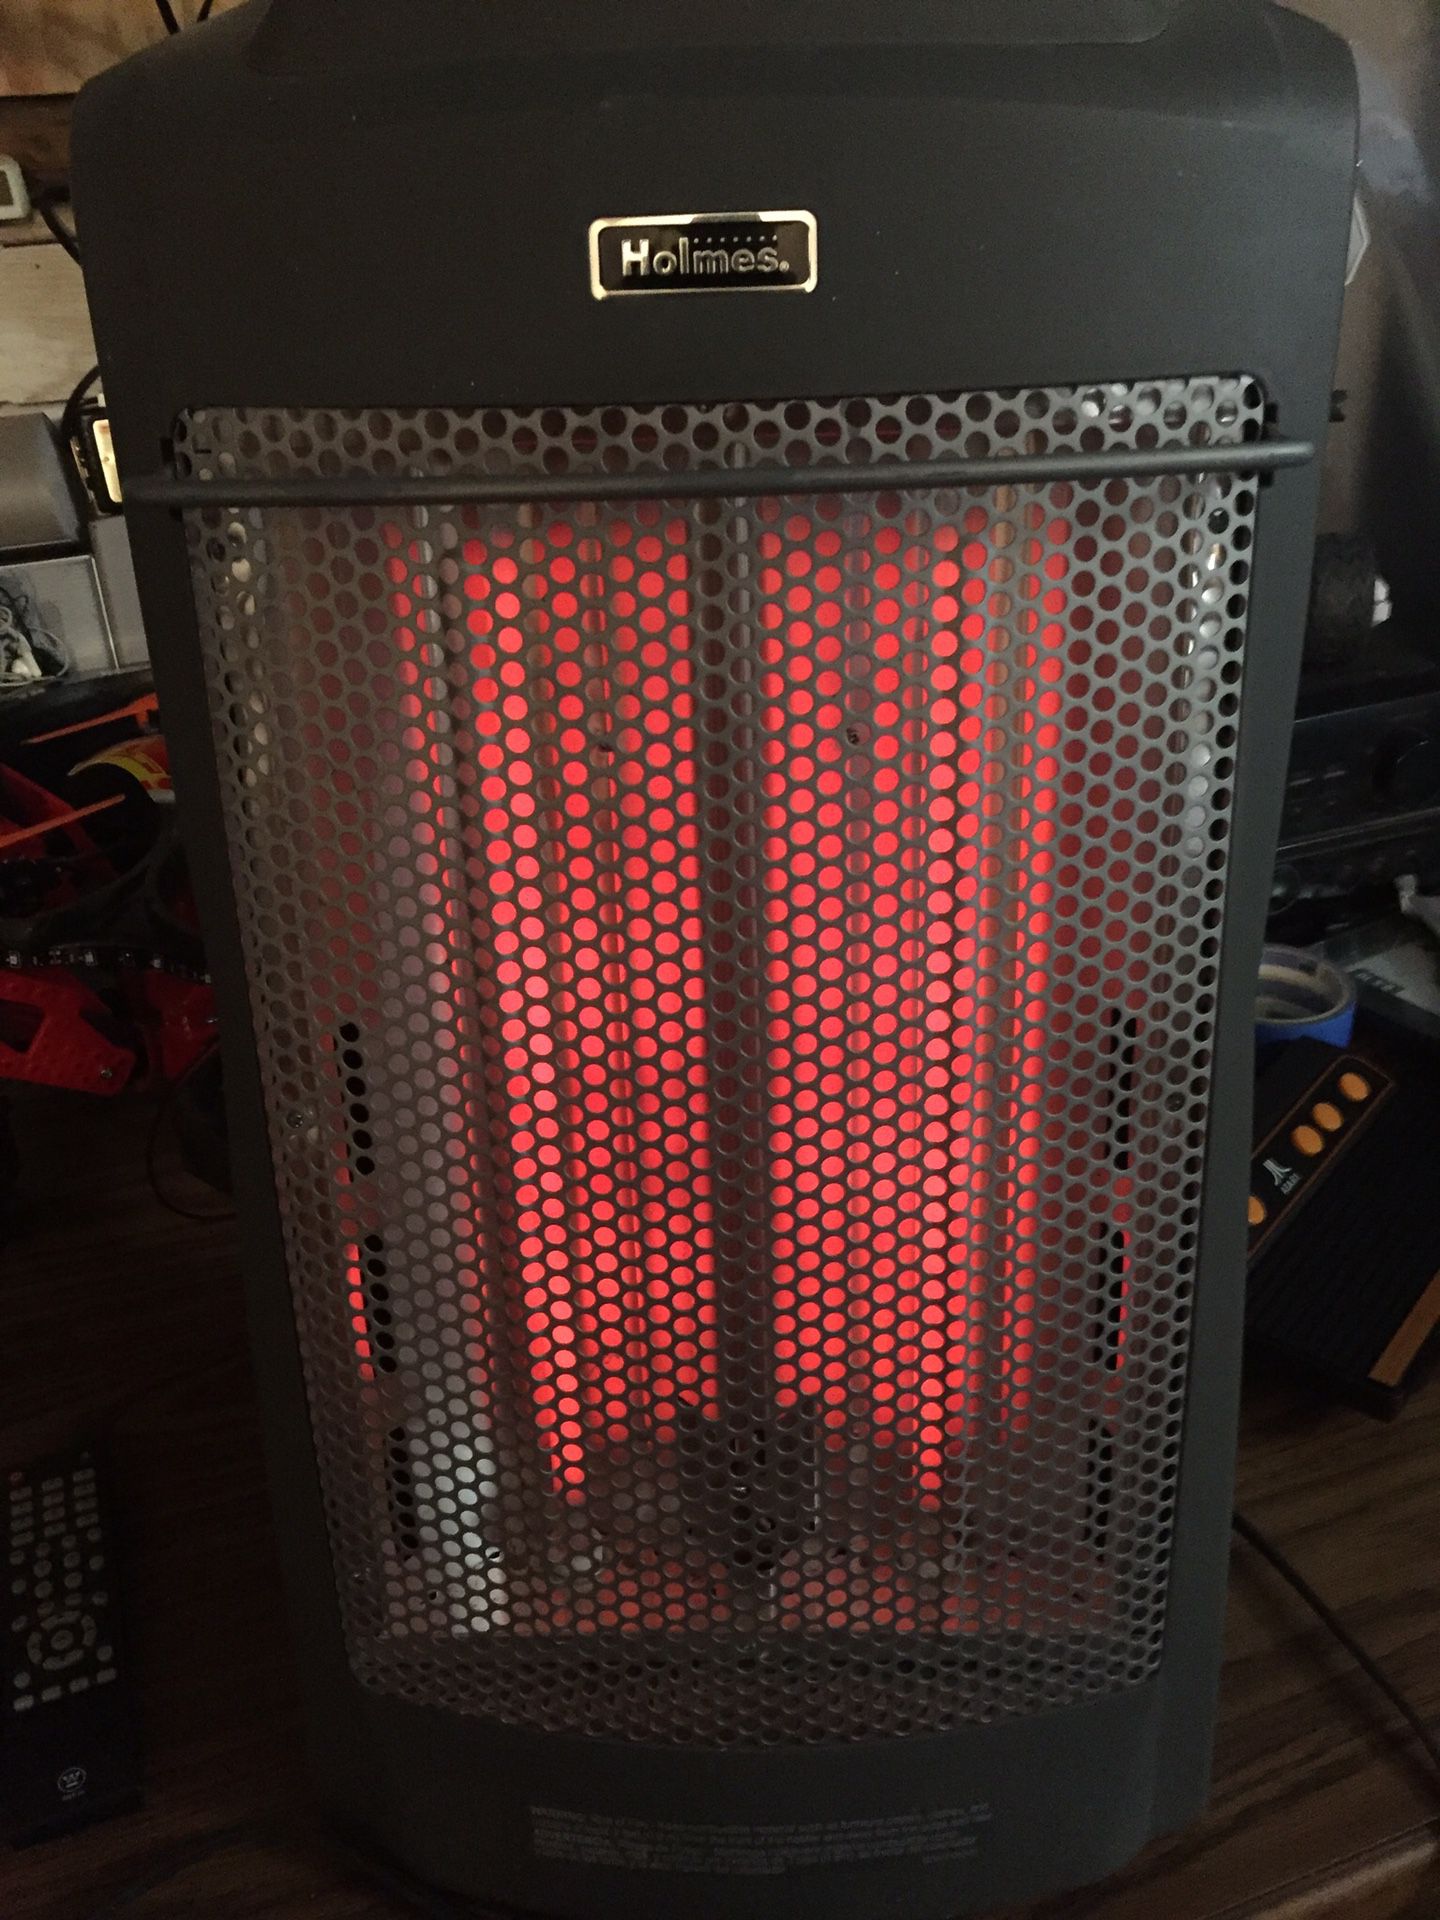 Holmes tower heater hot works great